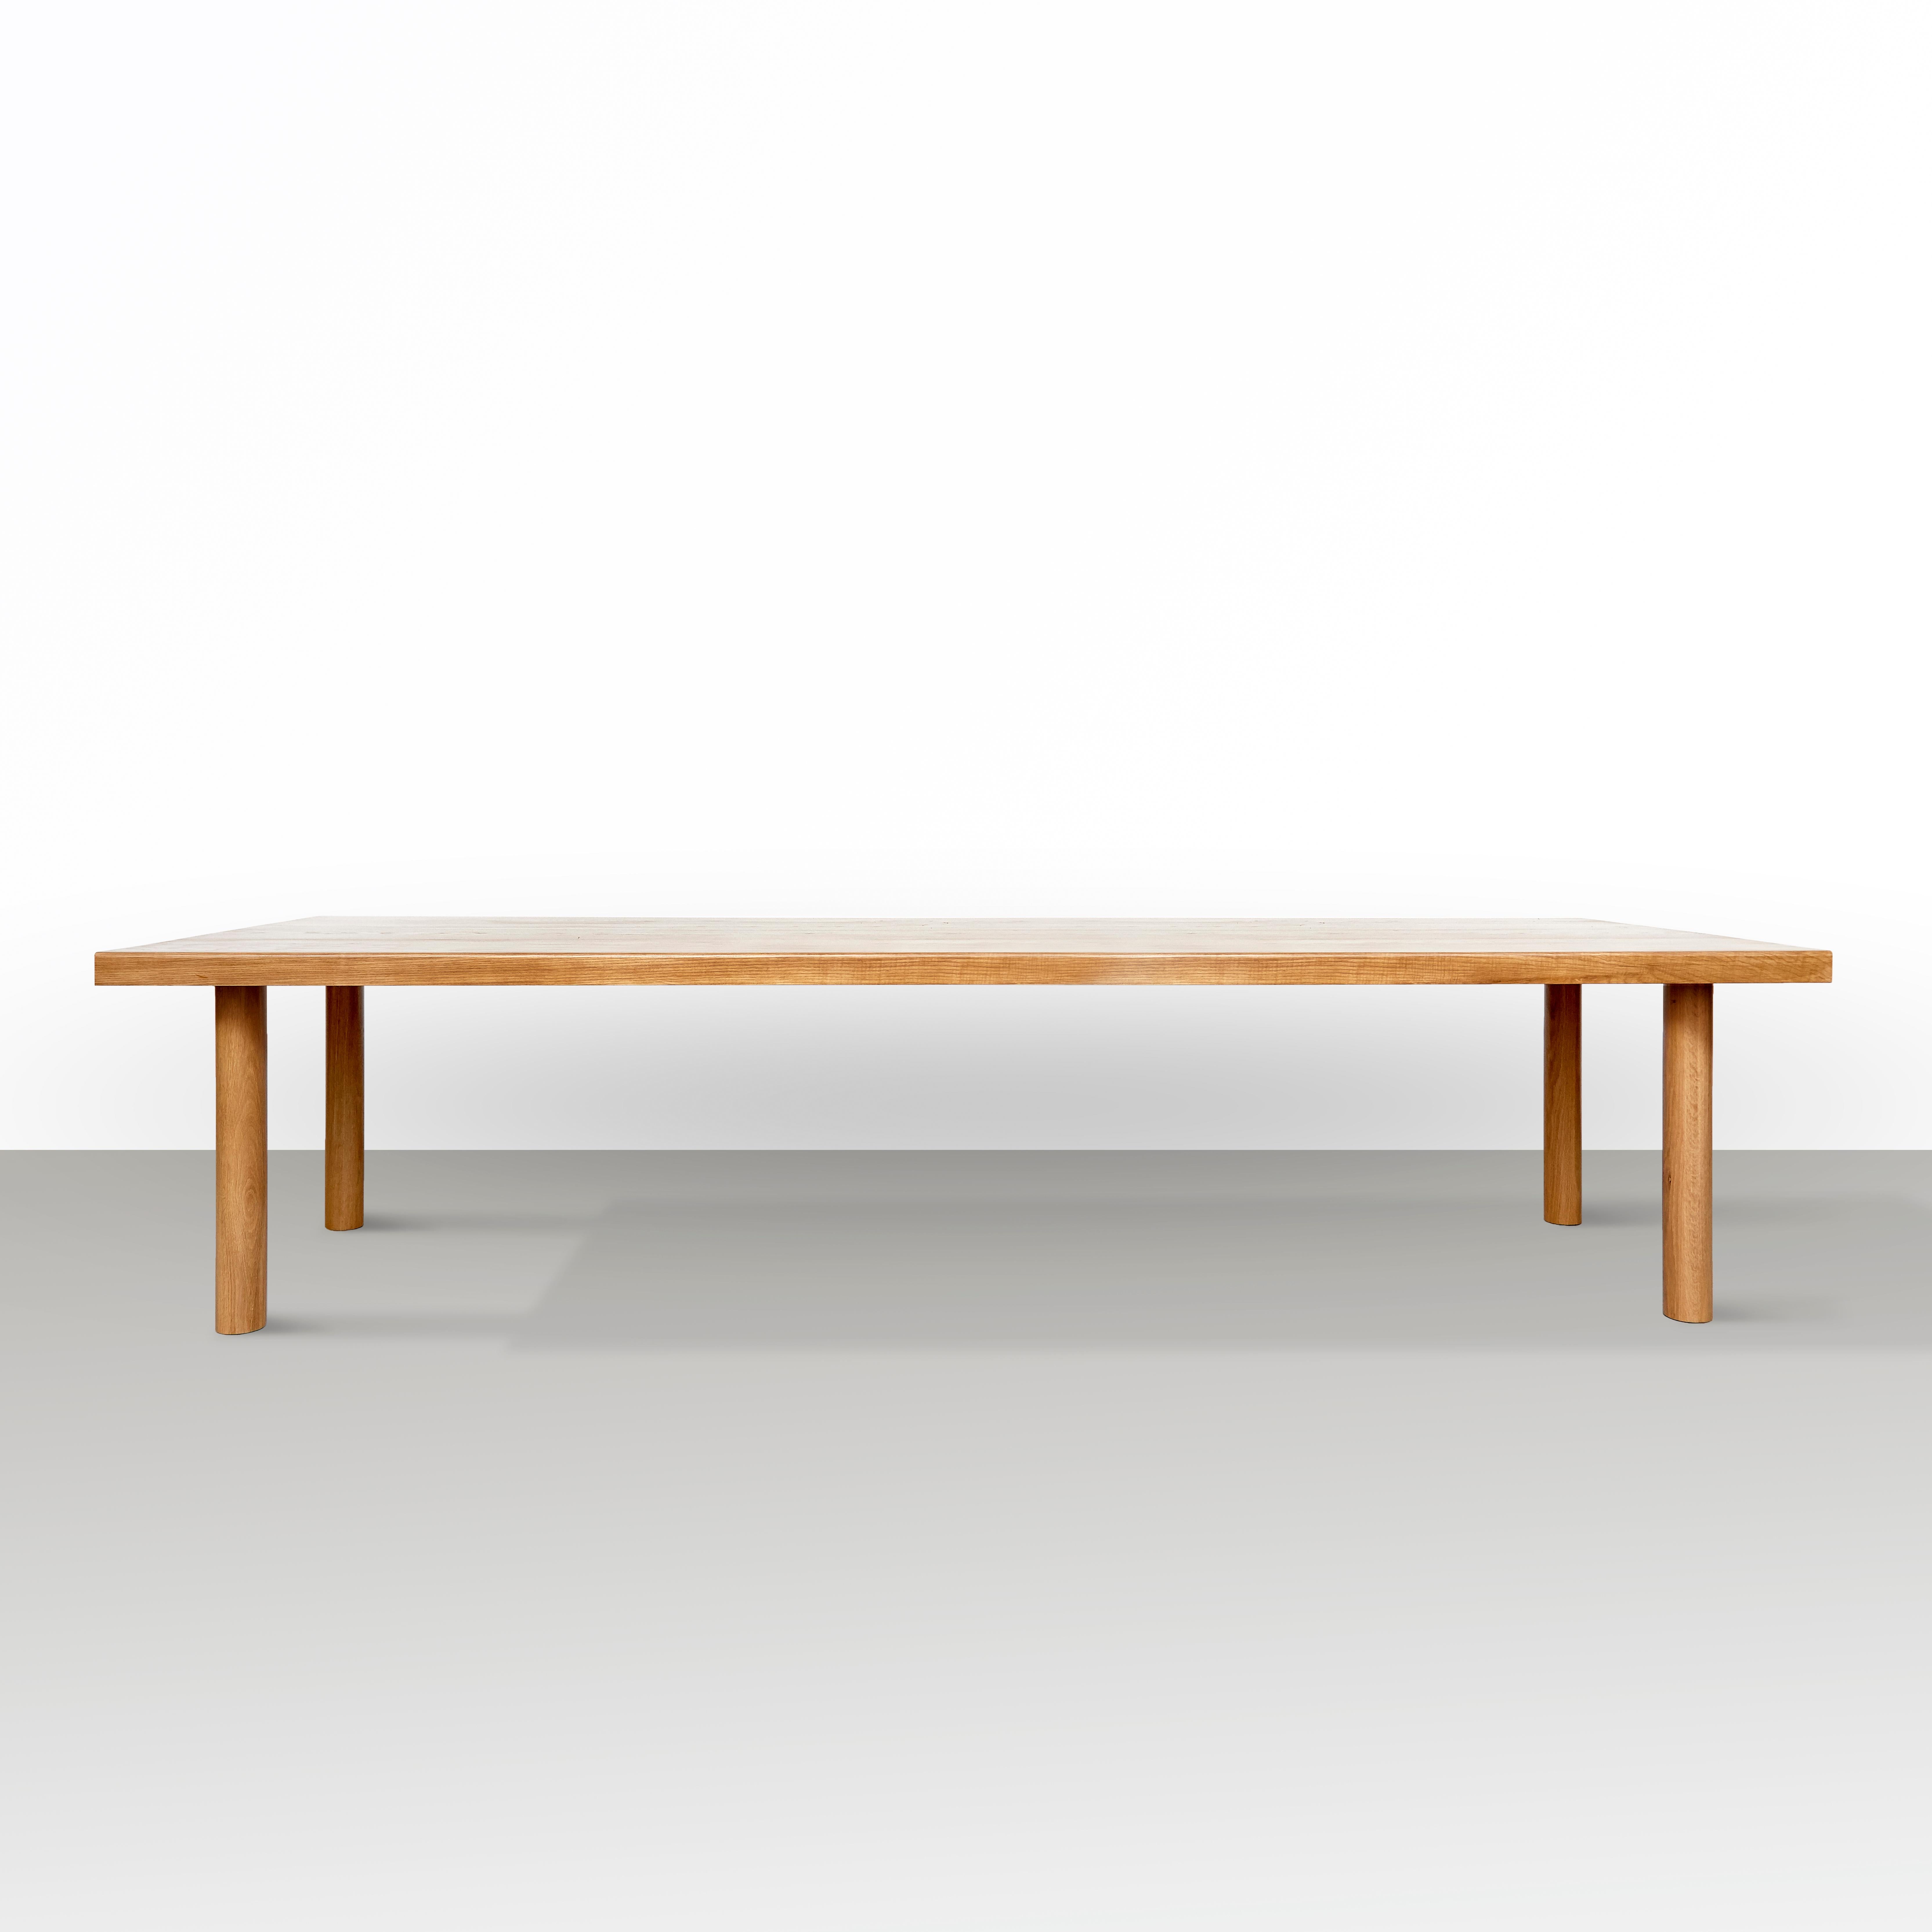 Large dining table by Dada est. manufactured in Barcelona, 2017.

Solid Ash tree eight people Table

Measures: 112.5 cm D x 290 cm W x 75 cm H 

Production delay: 6-8 weeks
There is the possibility of making it in different measures and